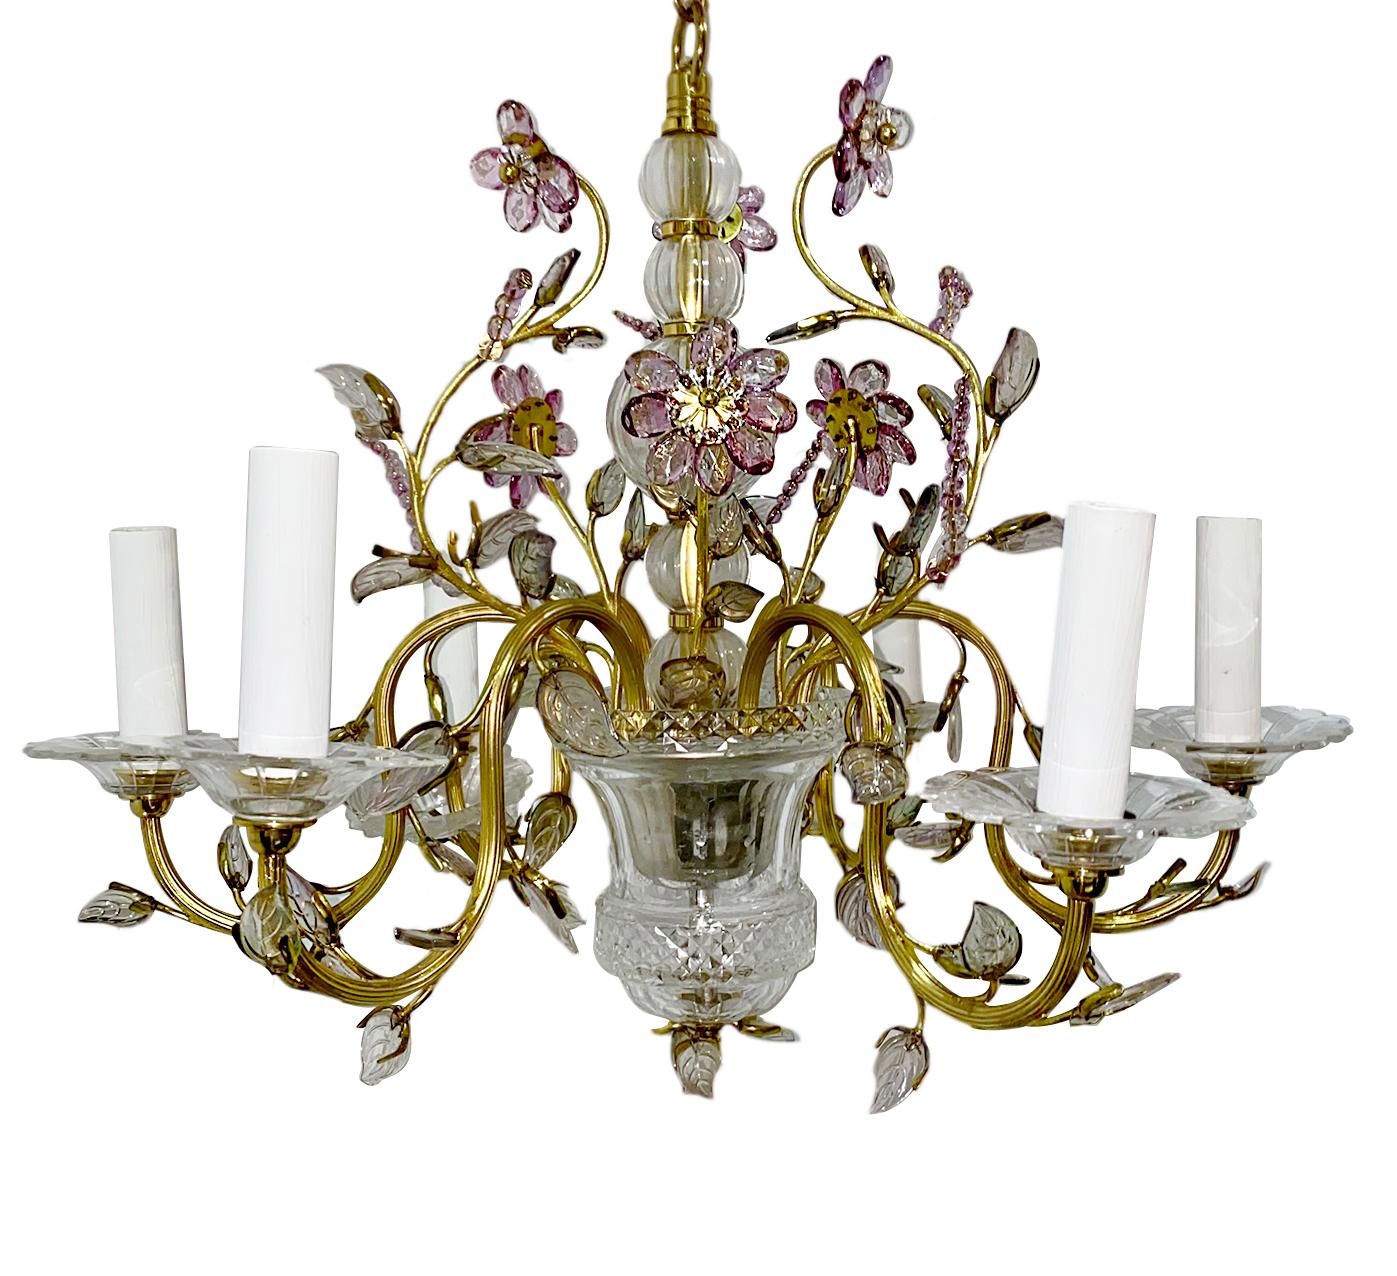 A circa 1950s French crystal chandelier with amethyst flowers and molded glass leaves.

Measurements:
Current drop: 22